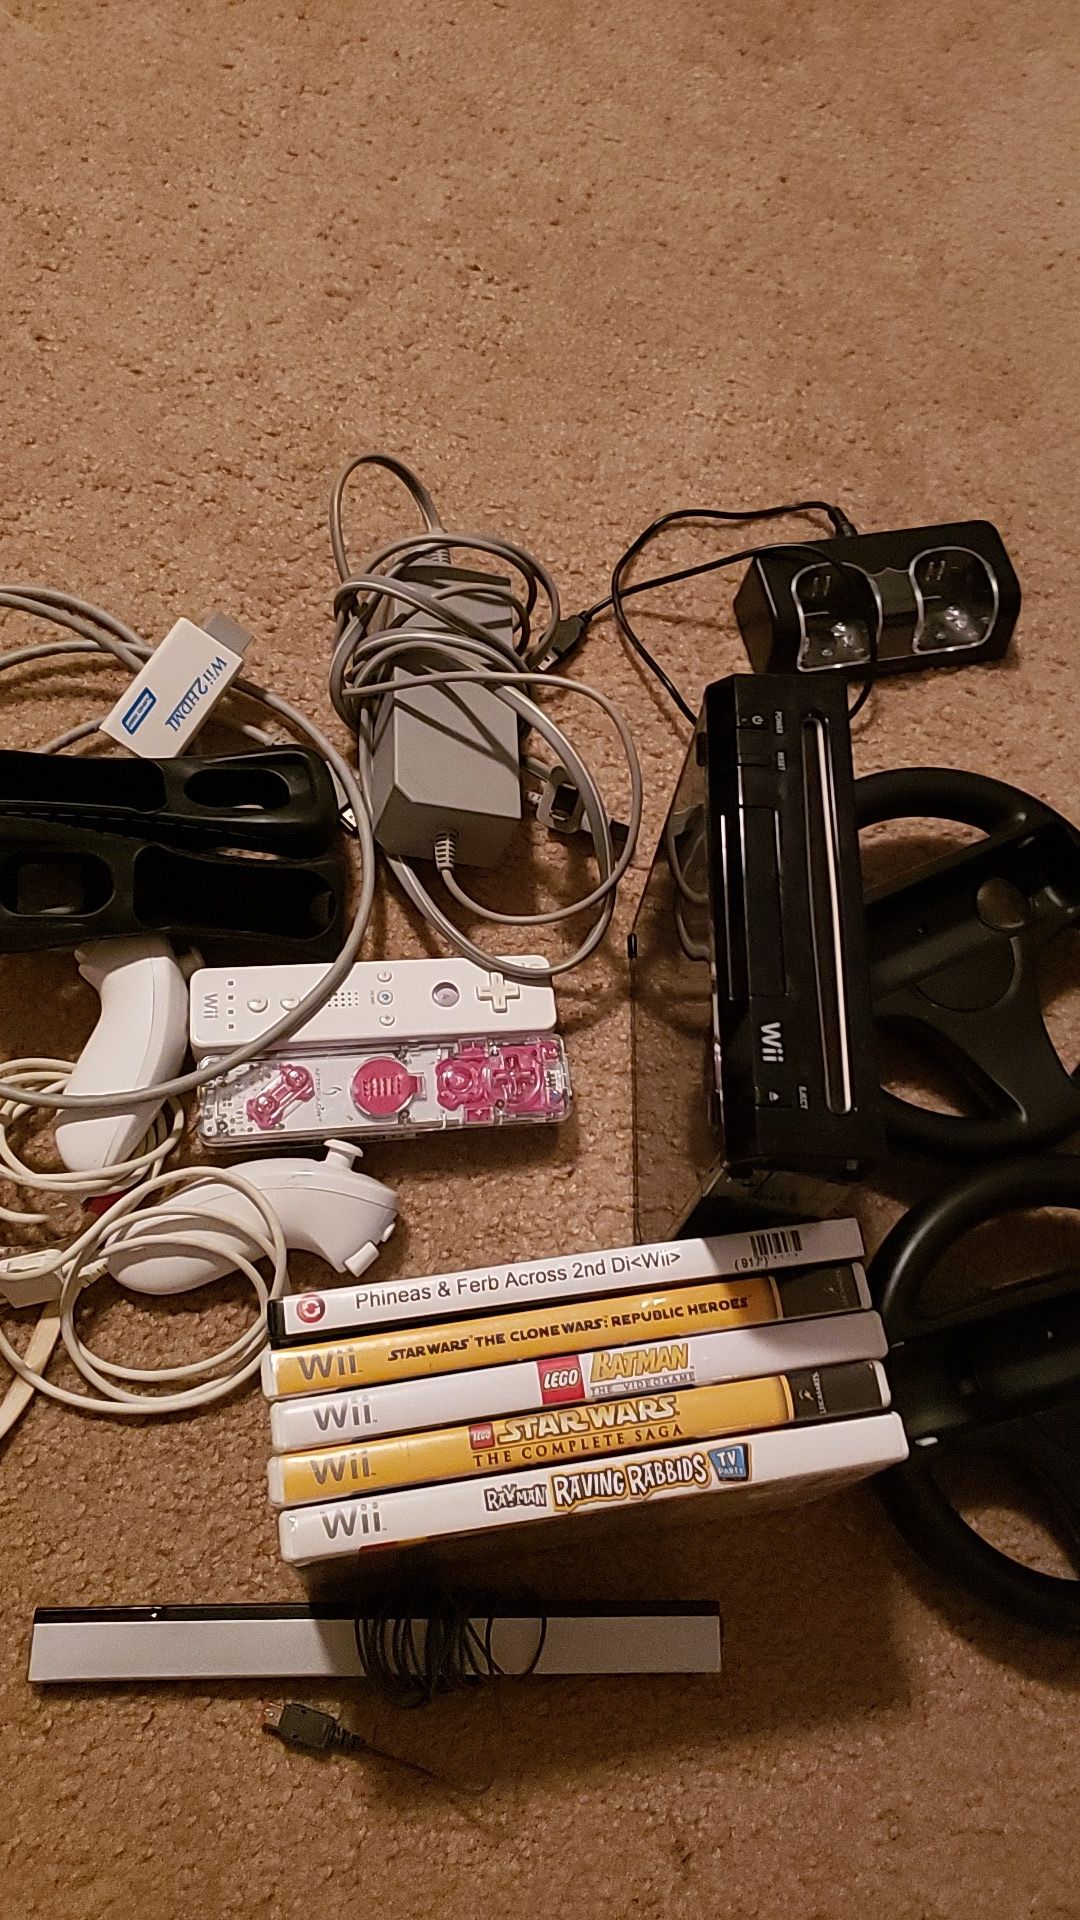 Wii system and accessories